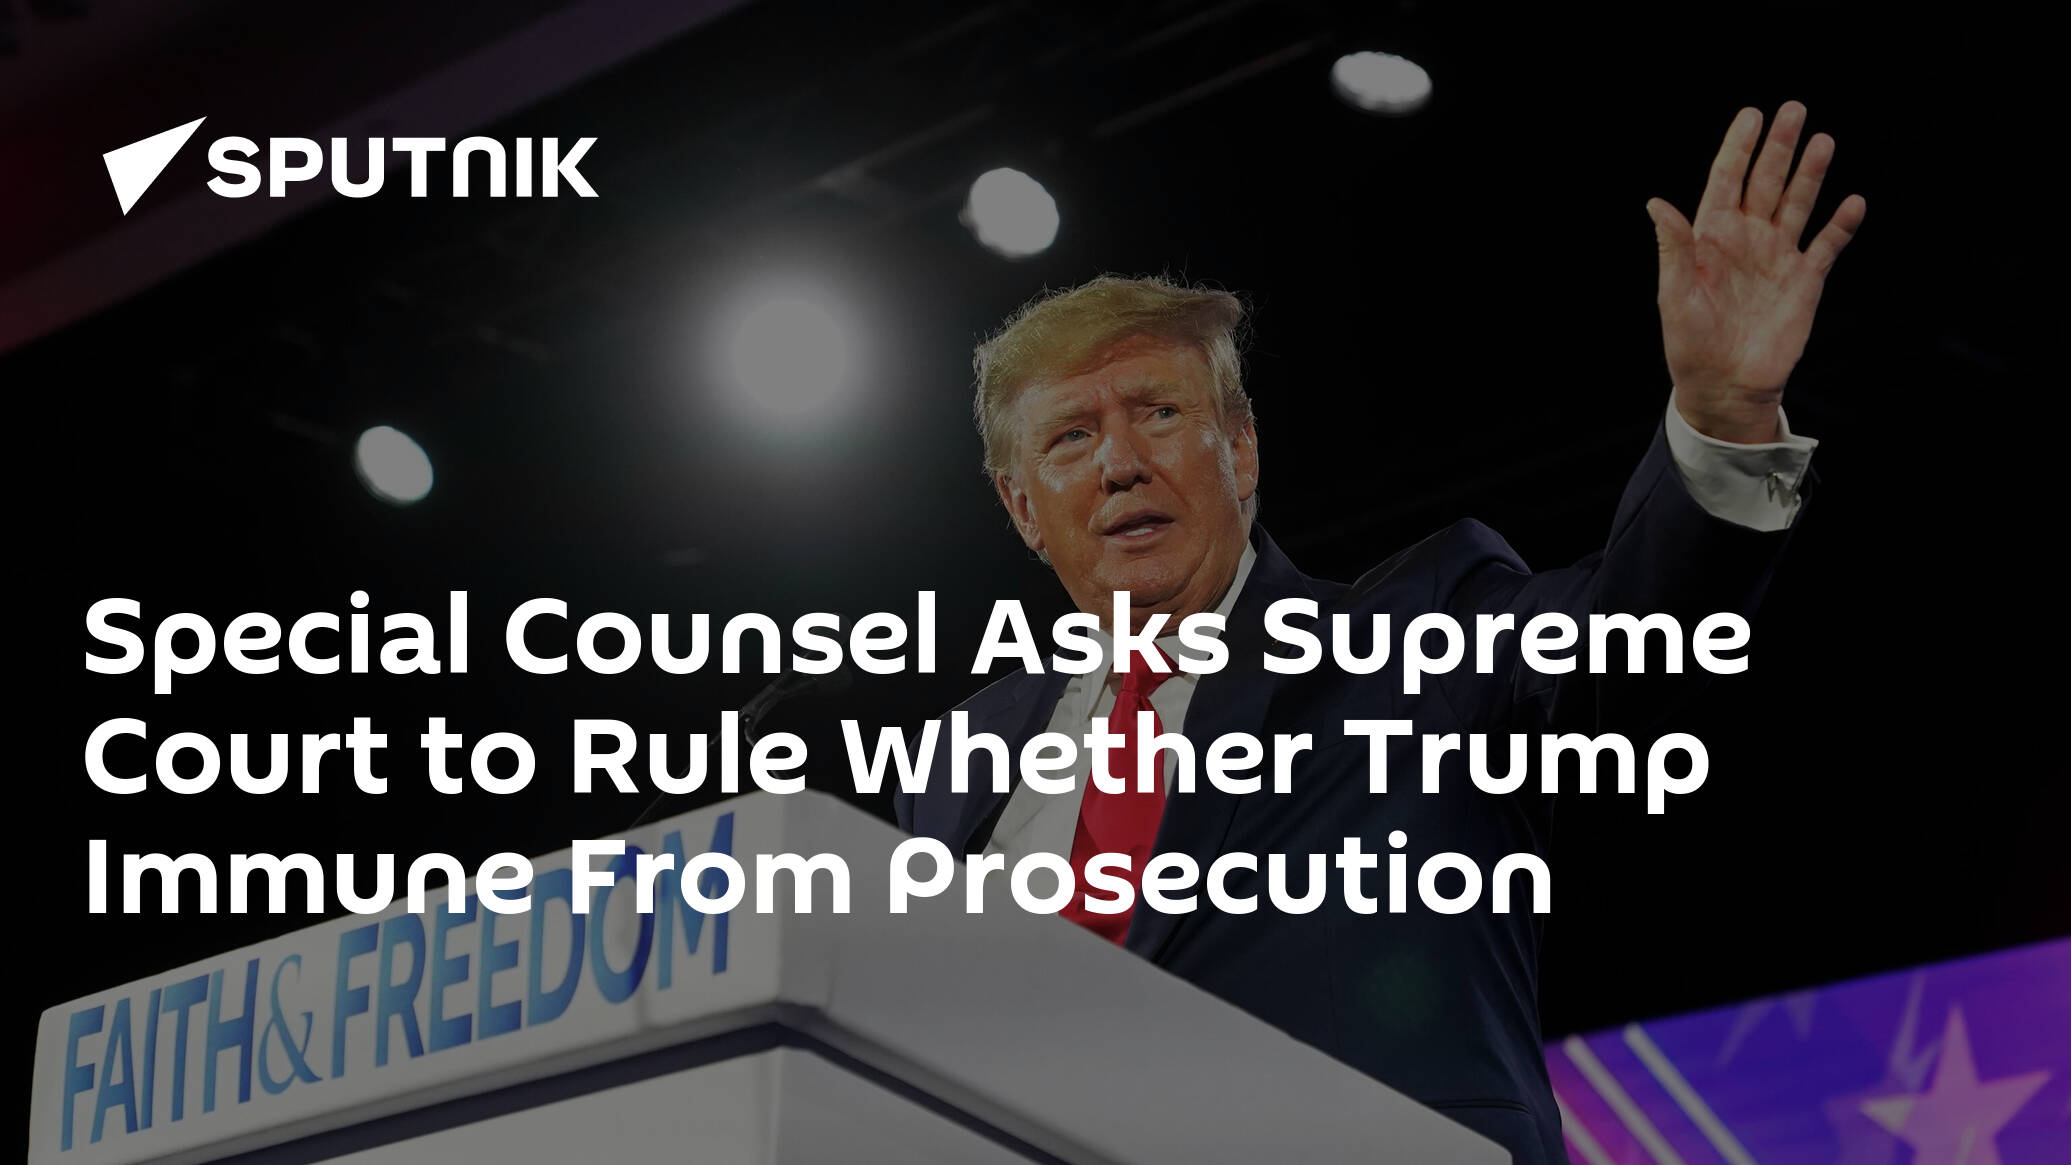 Special Counsel Asks Supreme Court to Rule Whether Trump Immune From Prosecution